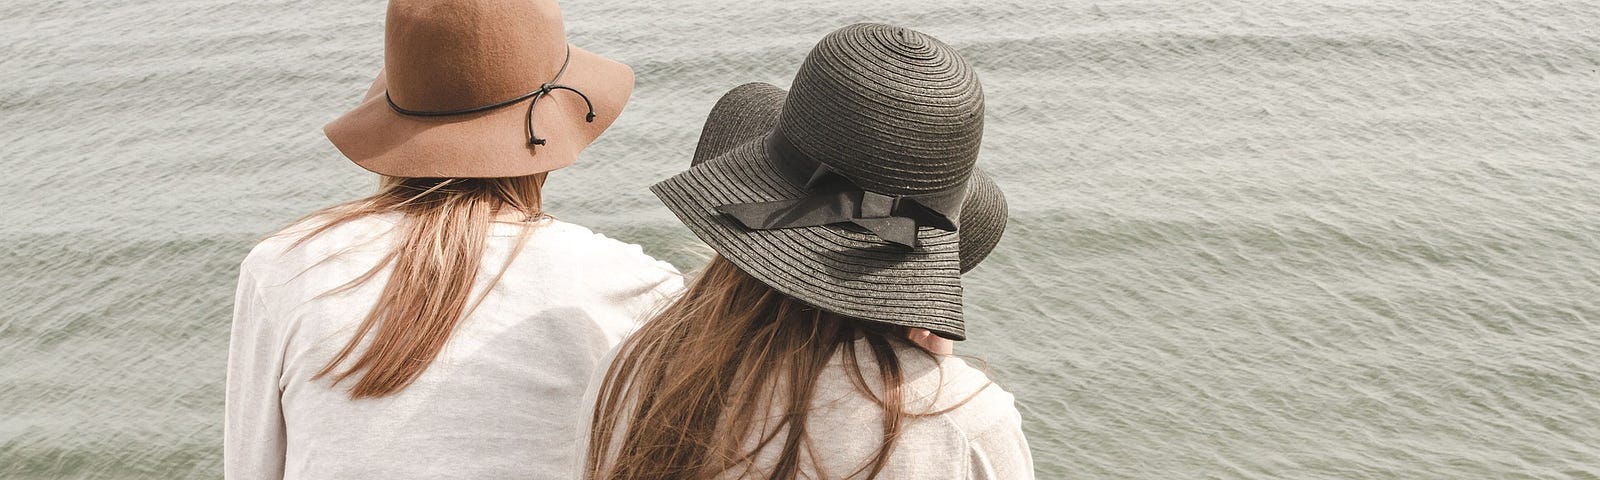 Decorative image: Two friends wearing sunhats sitting by the beach facing the water